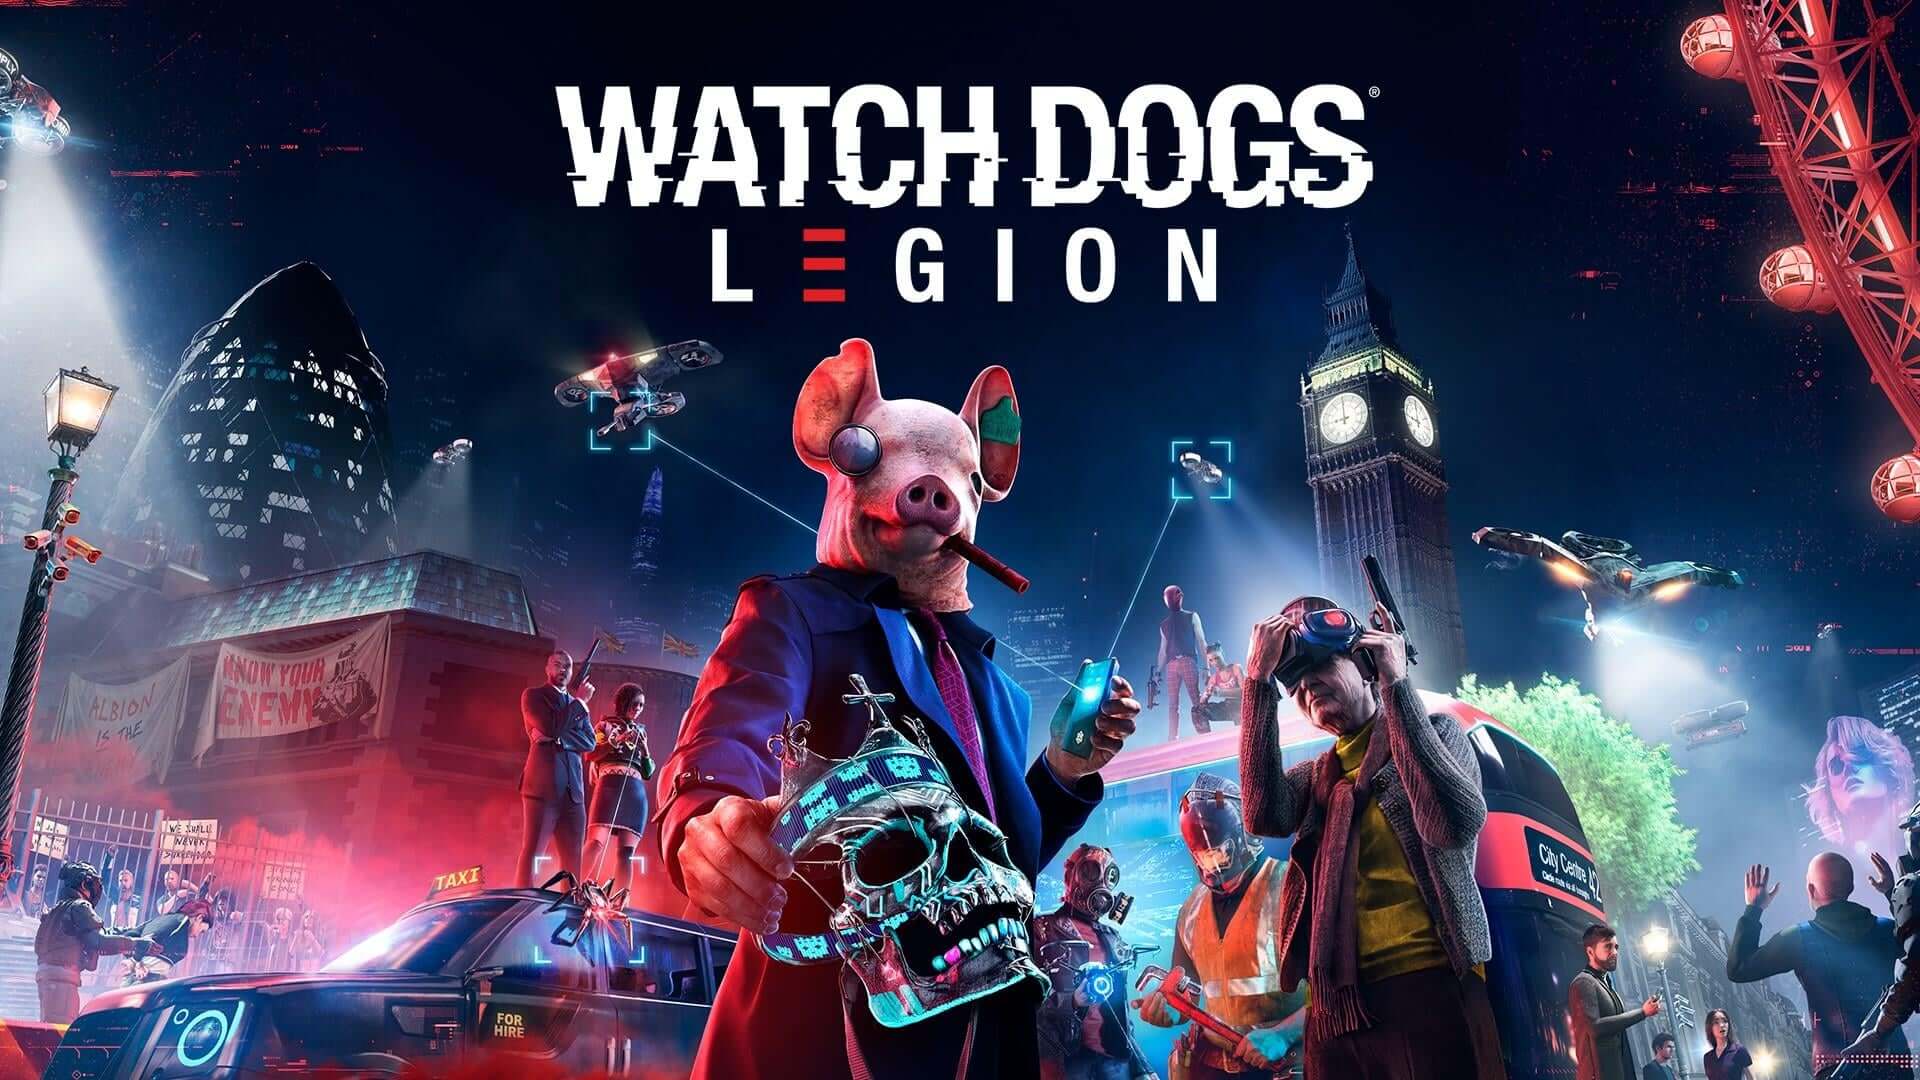 An image displaying characters form the game Watch Dogs Legions